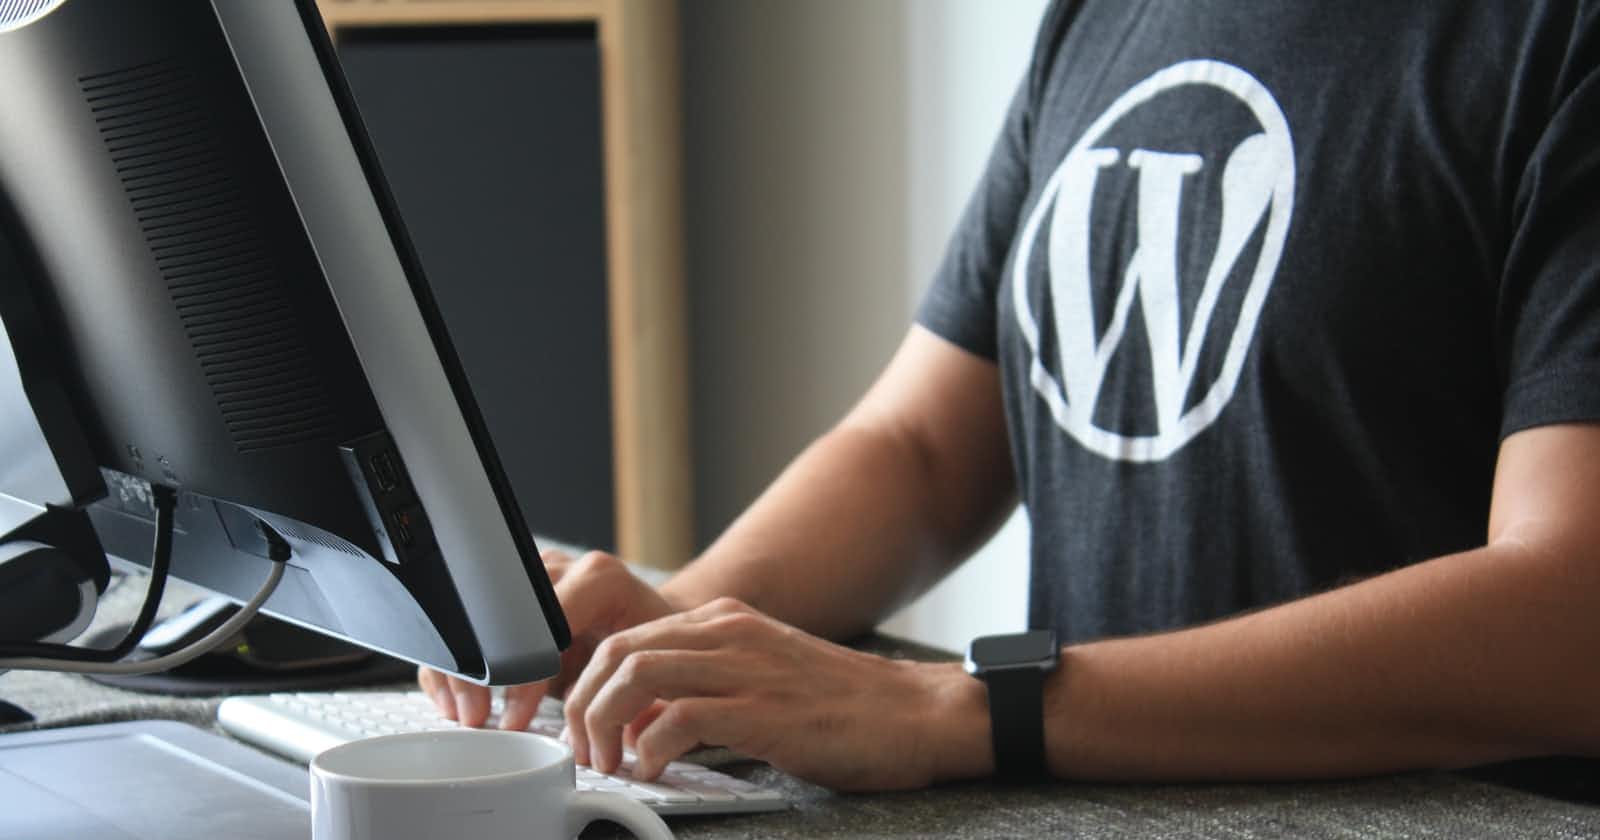 How to Fasten up a WordPress site?